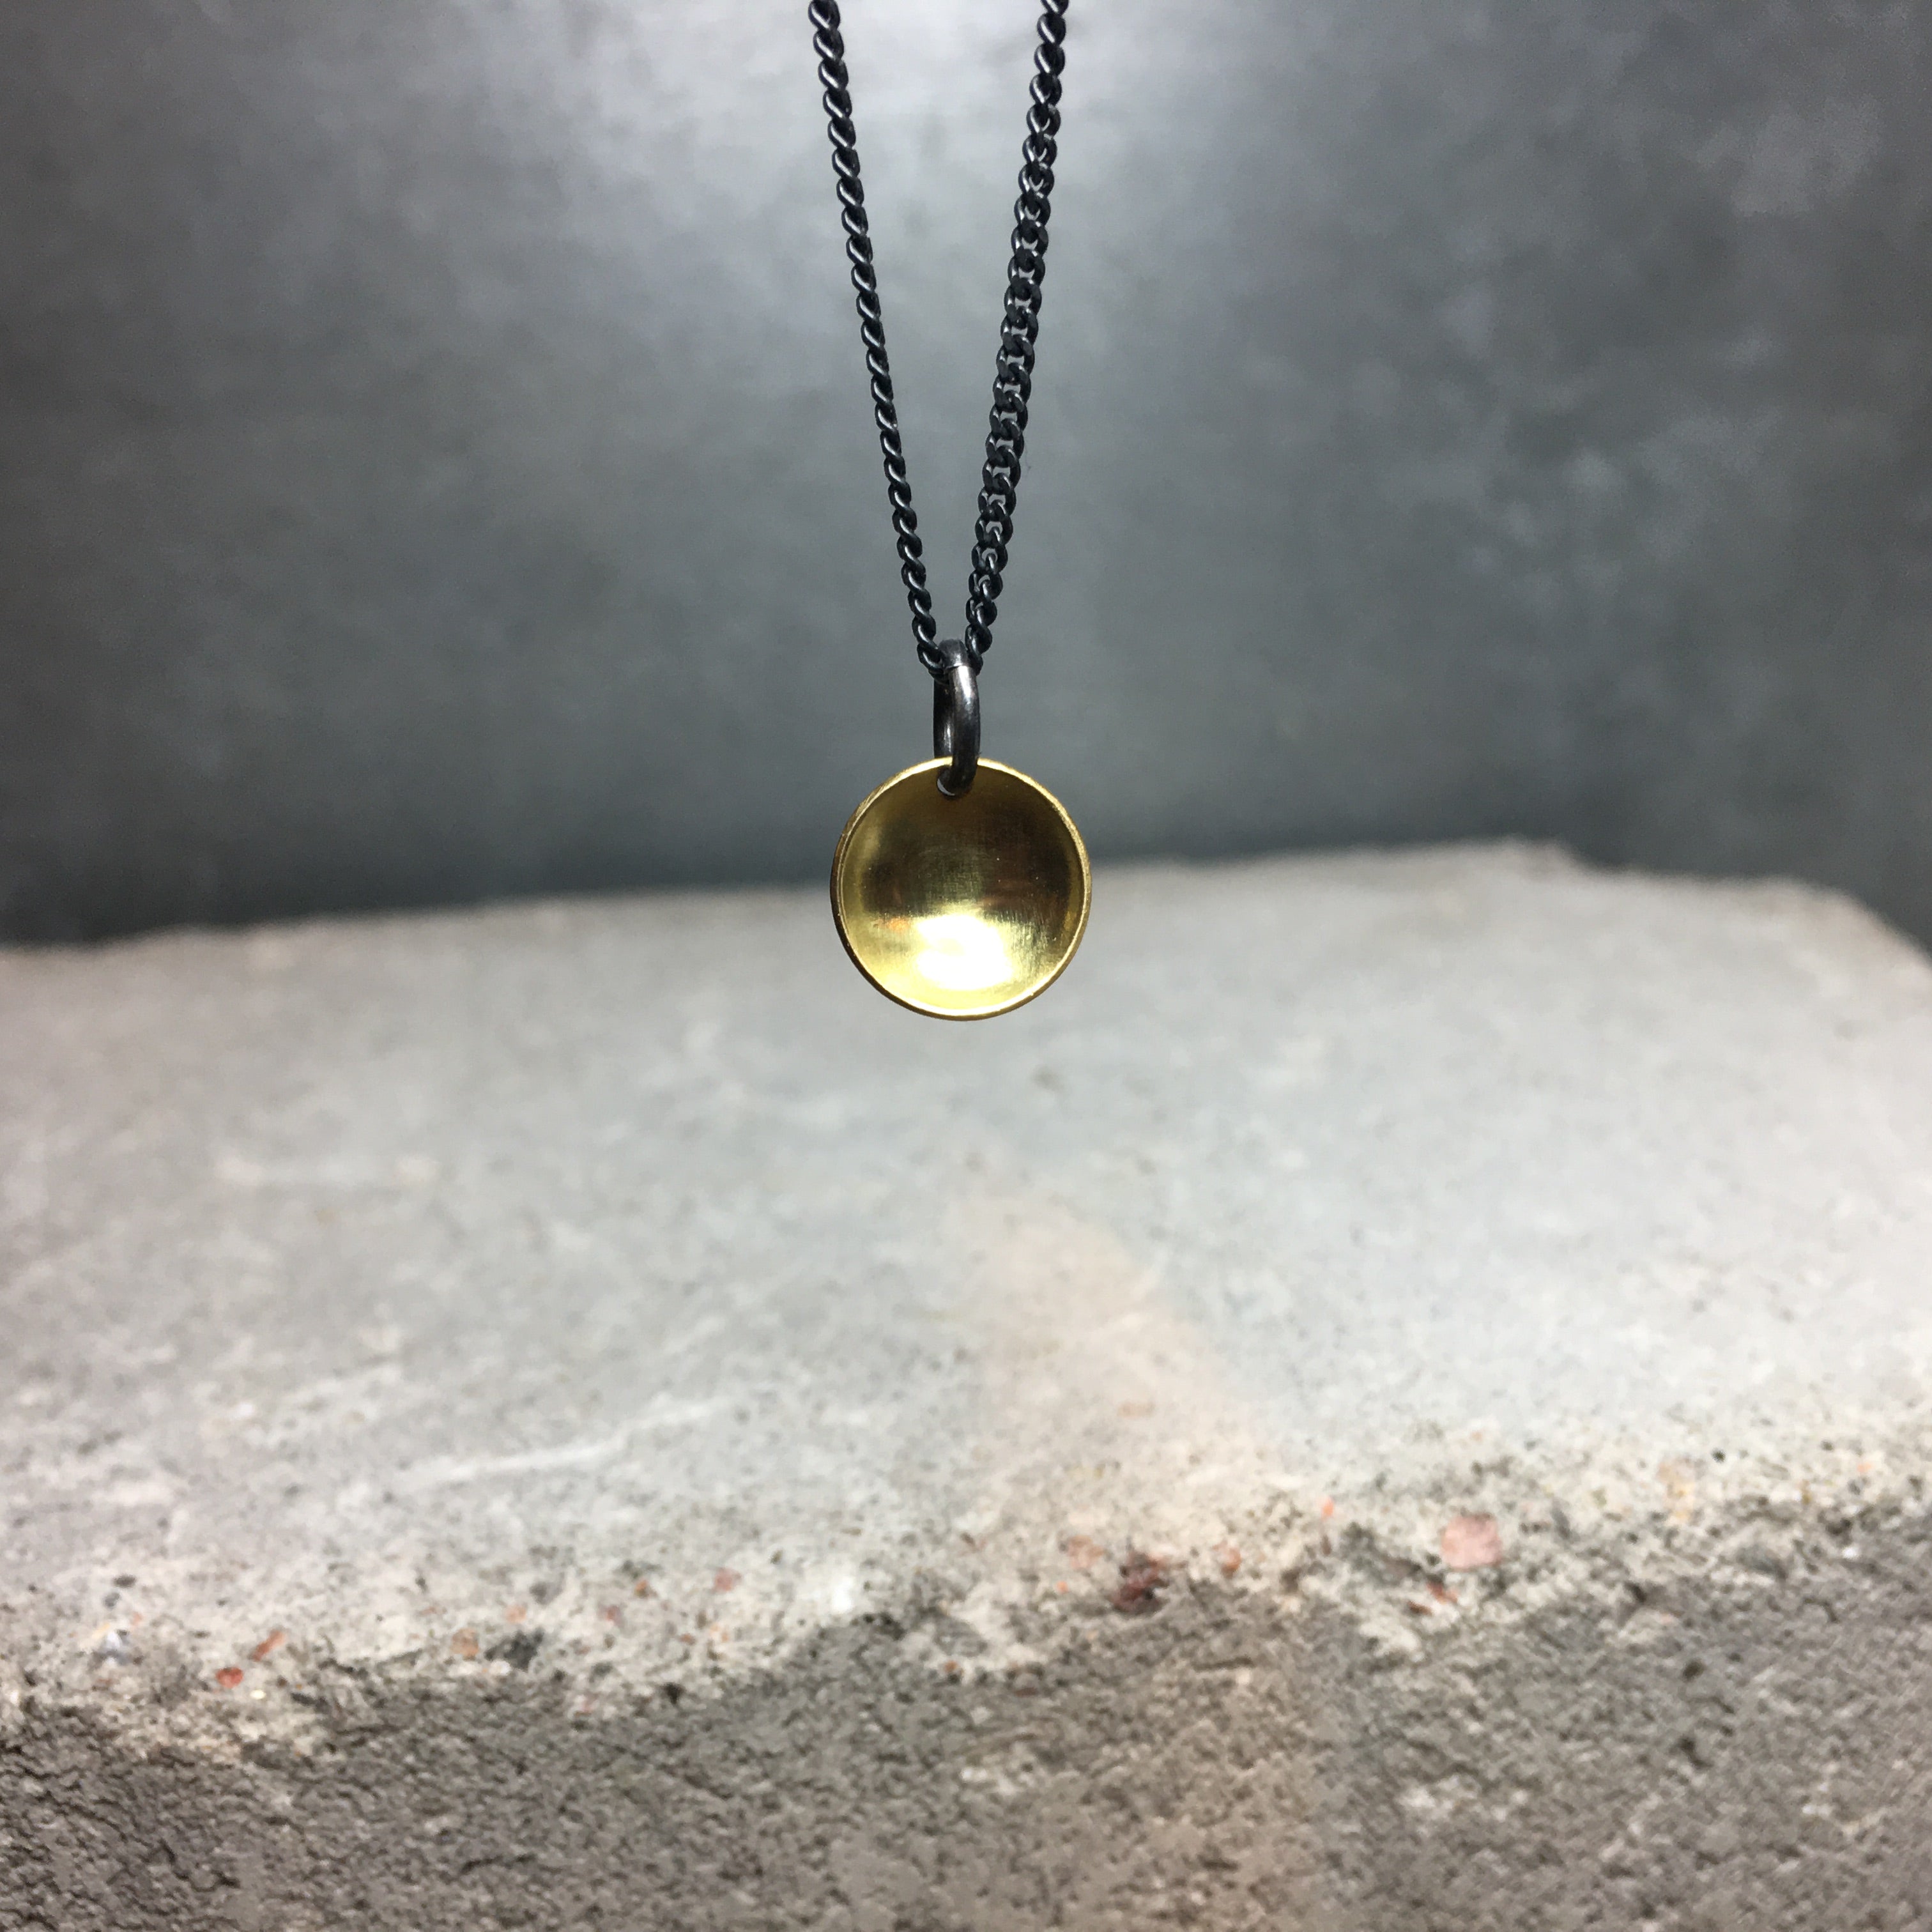 this cheap necklace is 90% brass, it was originally silver grey